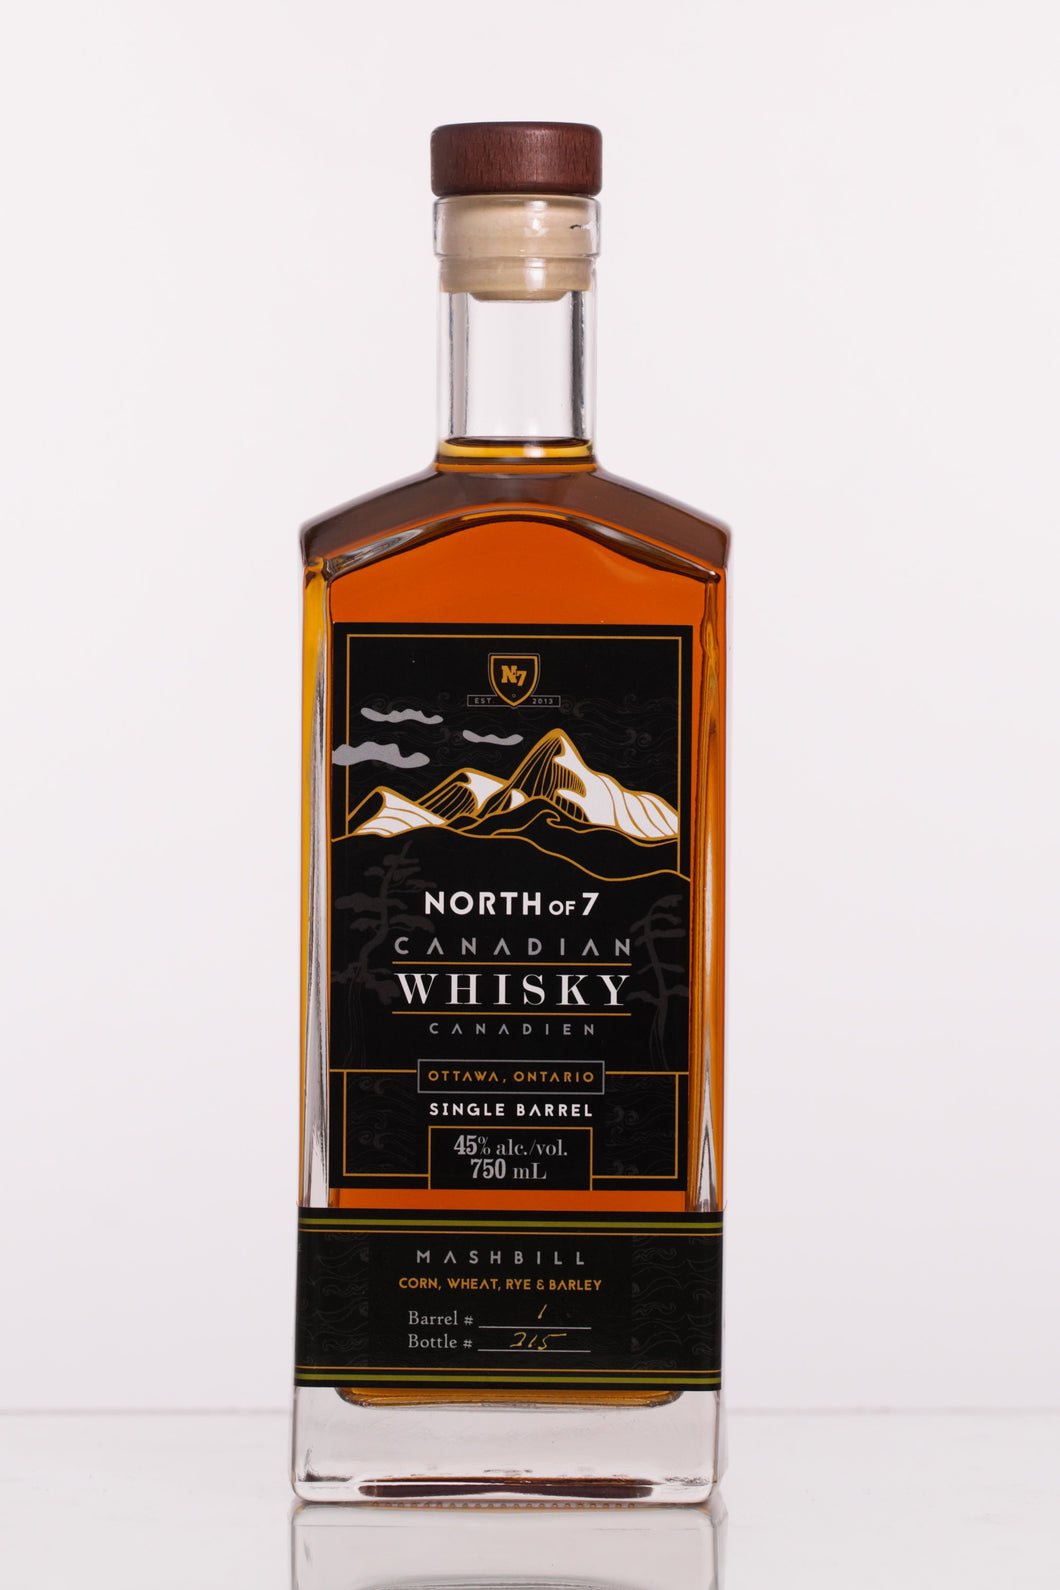 North of 7 Canadian Whisky - Four Grain Mashbill